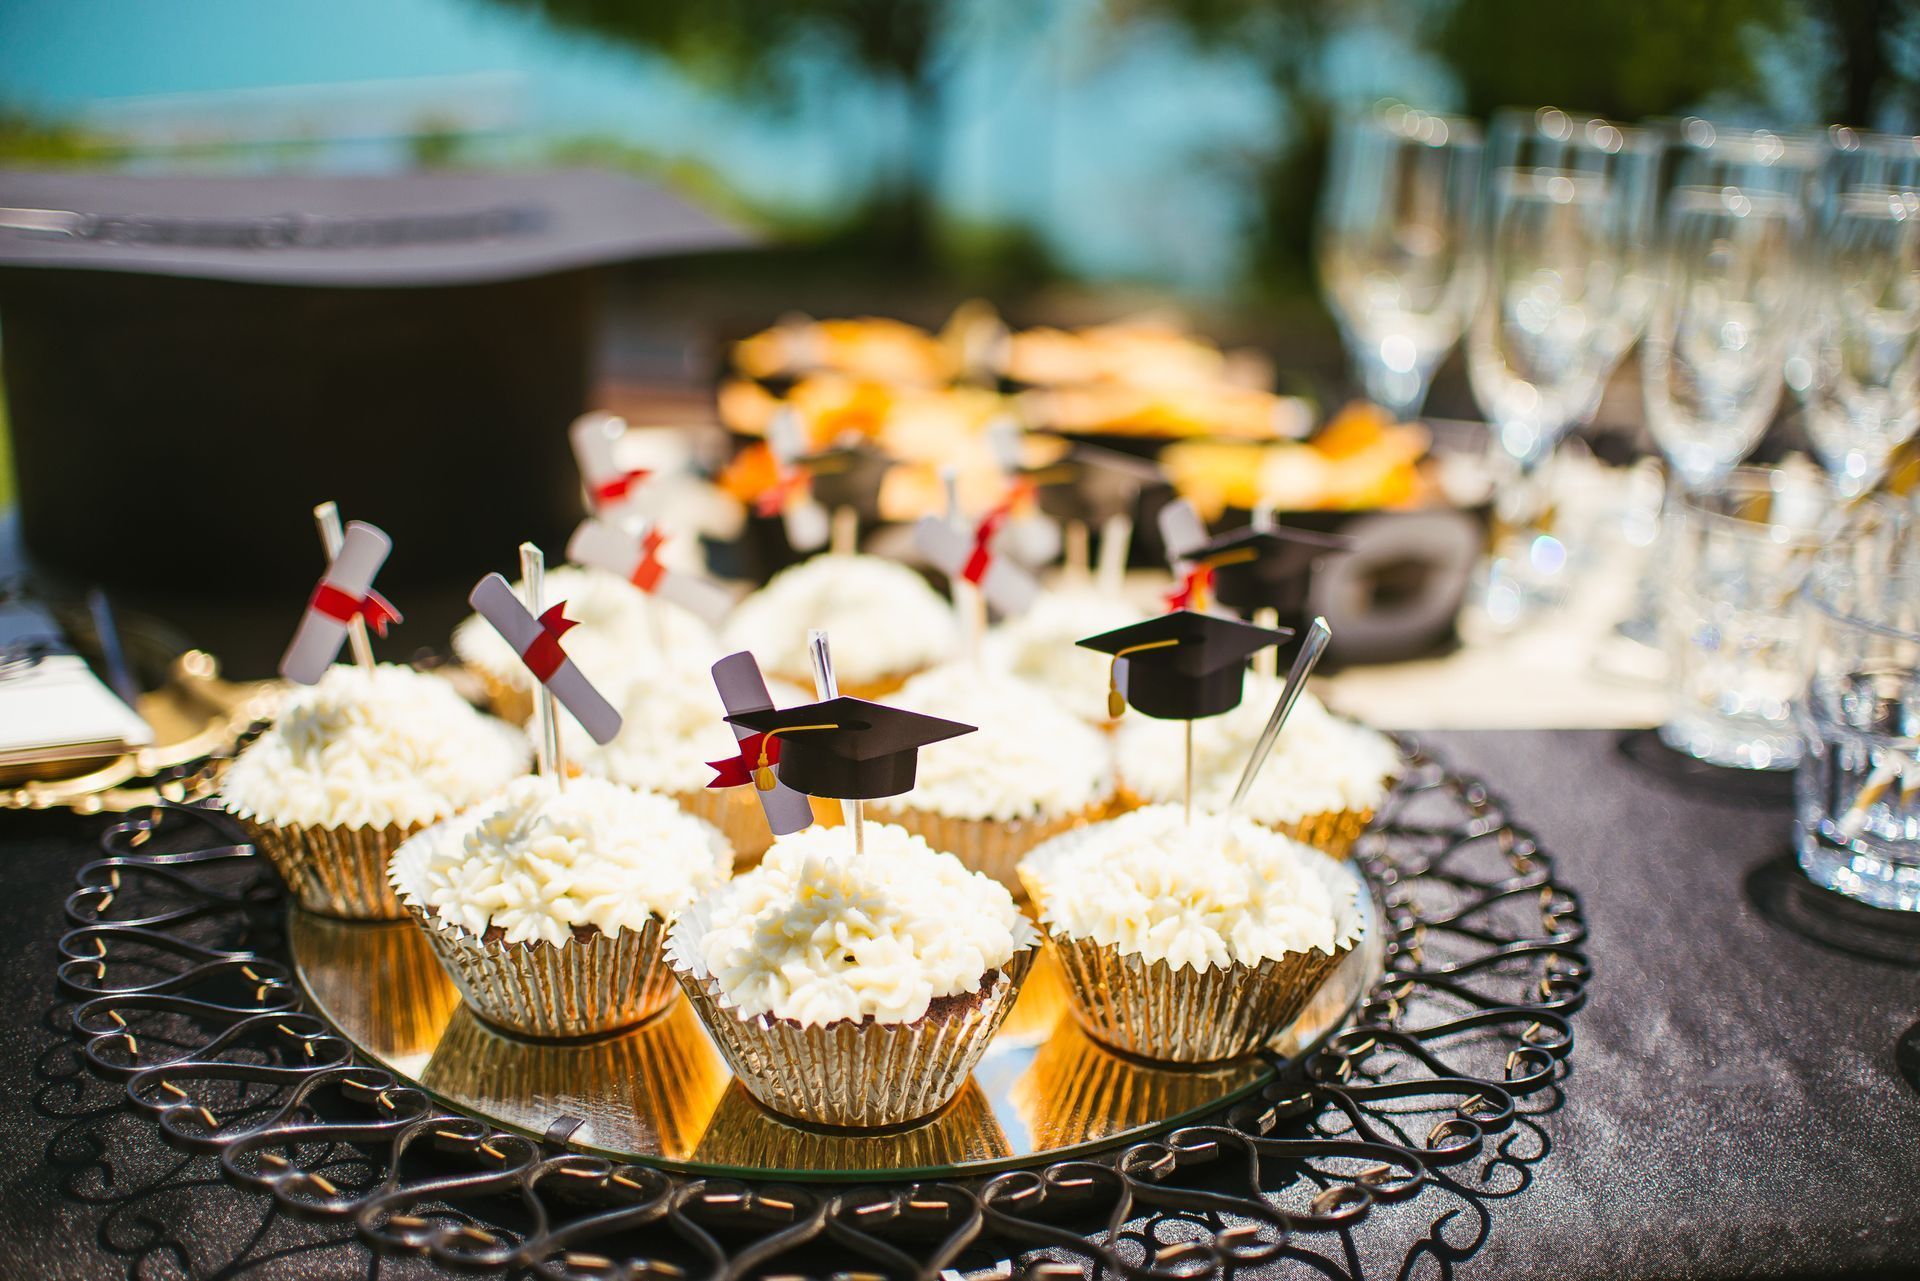 A table topped with cupcakes decorated with graduation caps and diplomas.